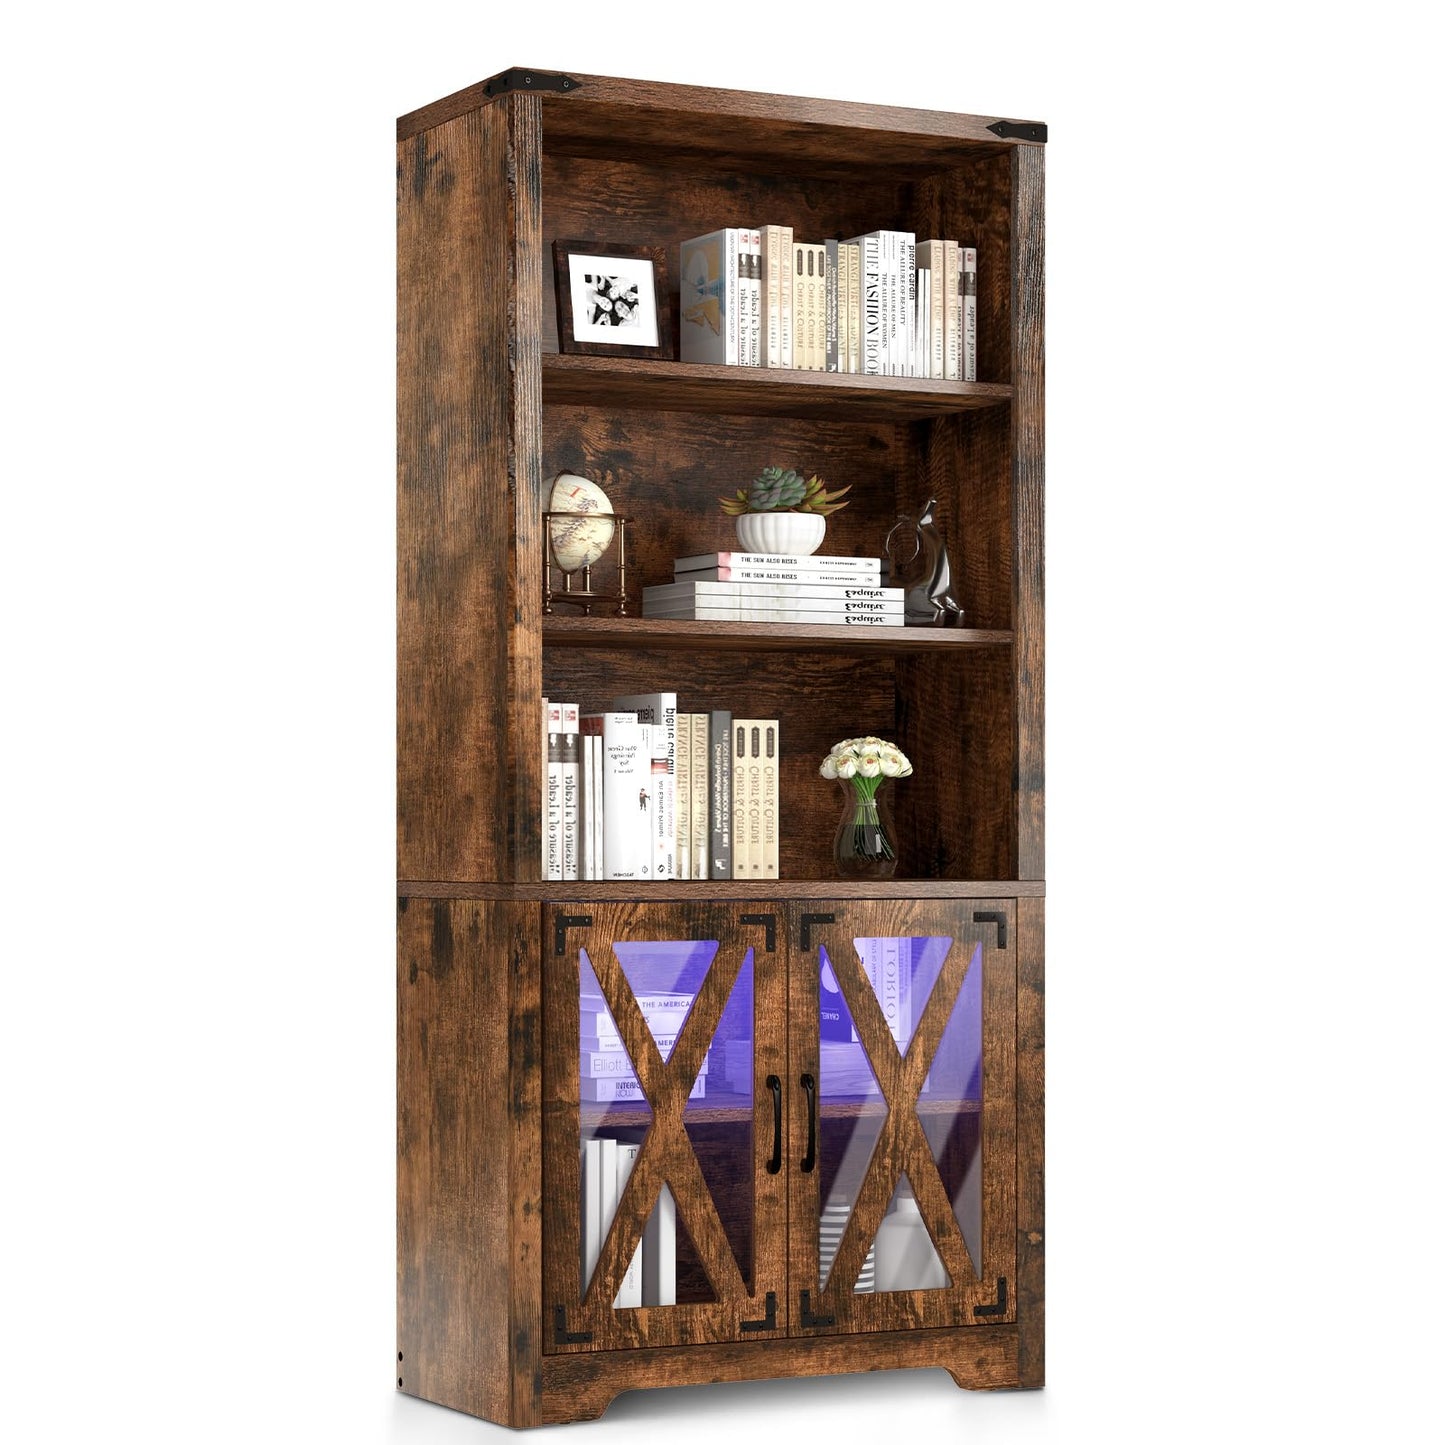 YITAHOME Farmhouse Storage Cabinet with Doors and Shelves,Industrial Pantry Cabinet with LED Lights Tall Display Cabinet for Kitchen,Living Room,Dining Room - Rustic Brown